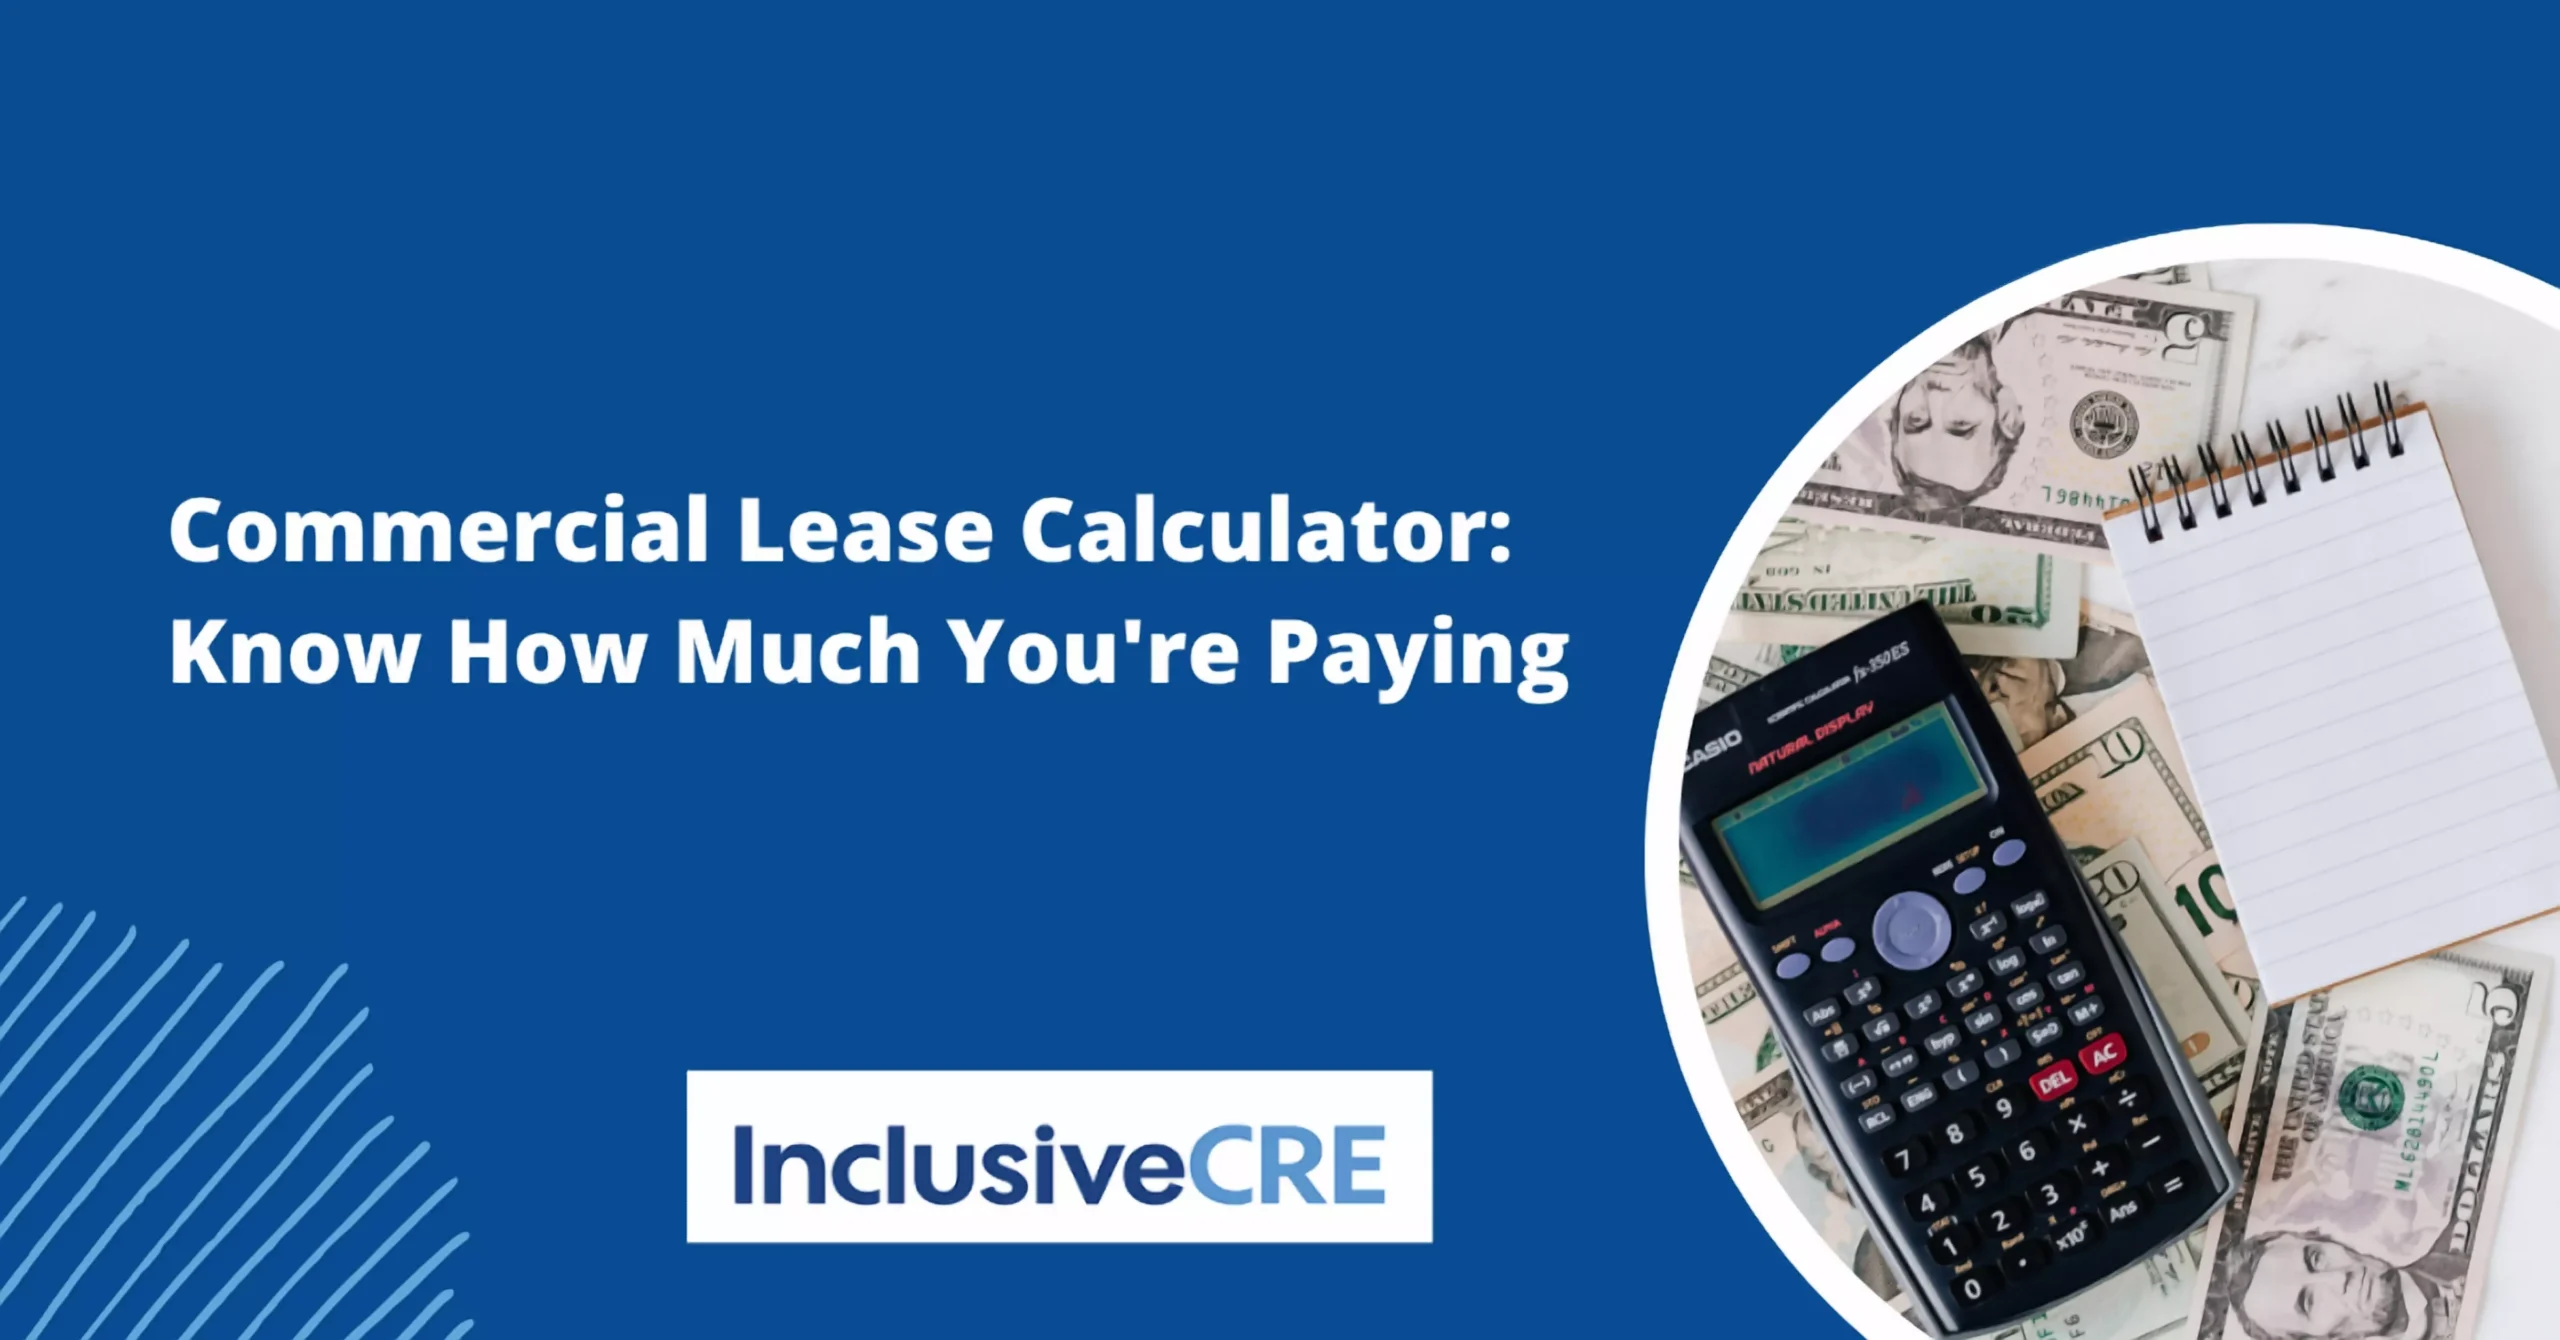 Article image about commercial lease calculator and the process of calculating commercial lease expenses.